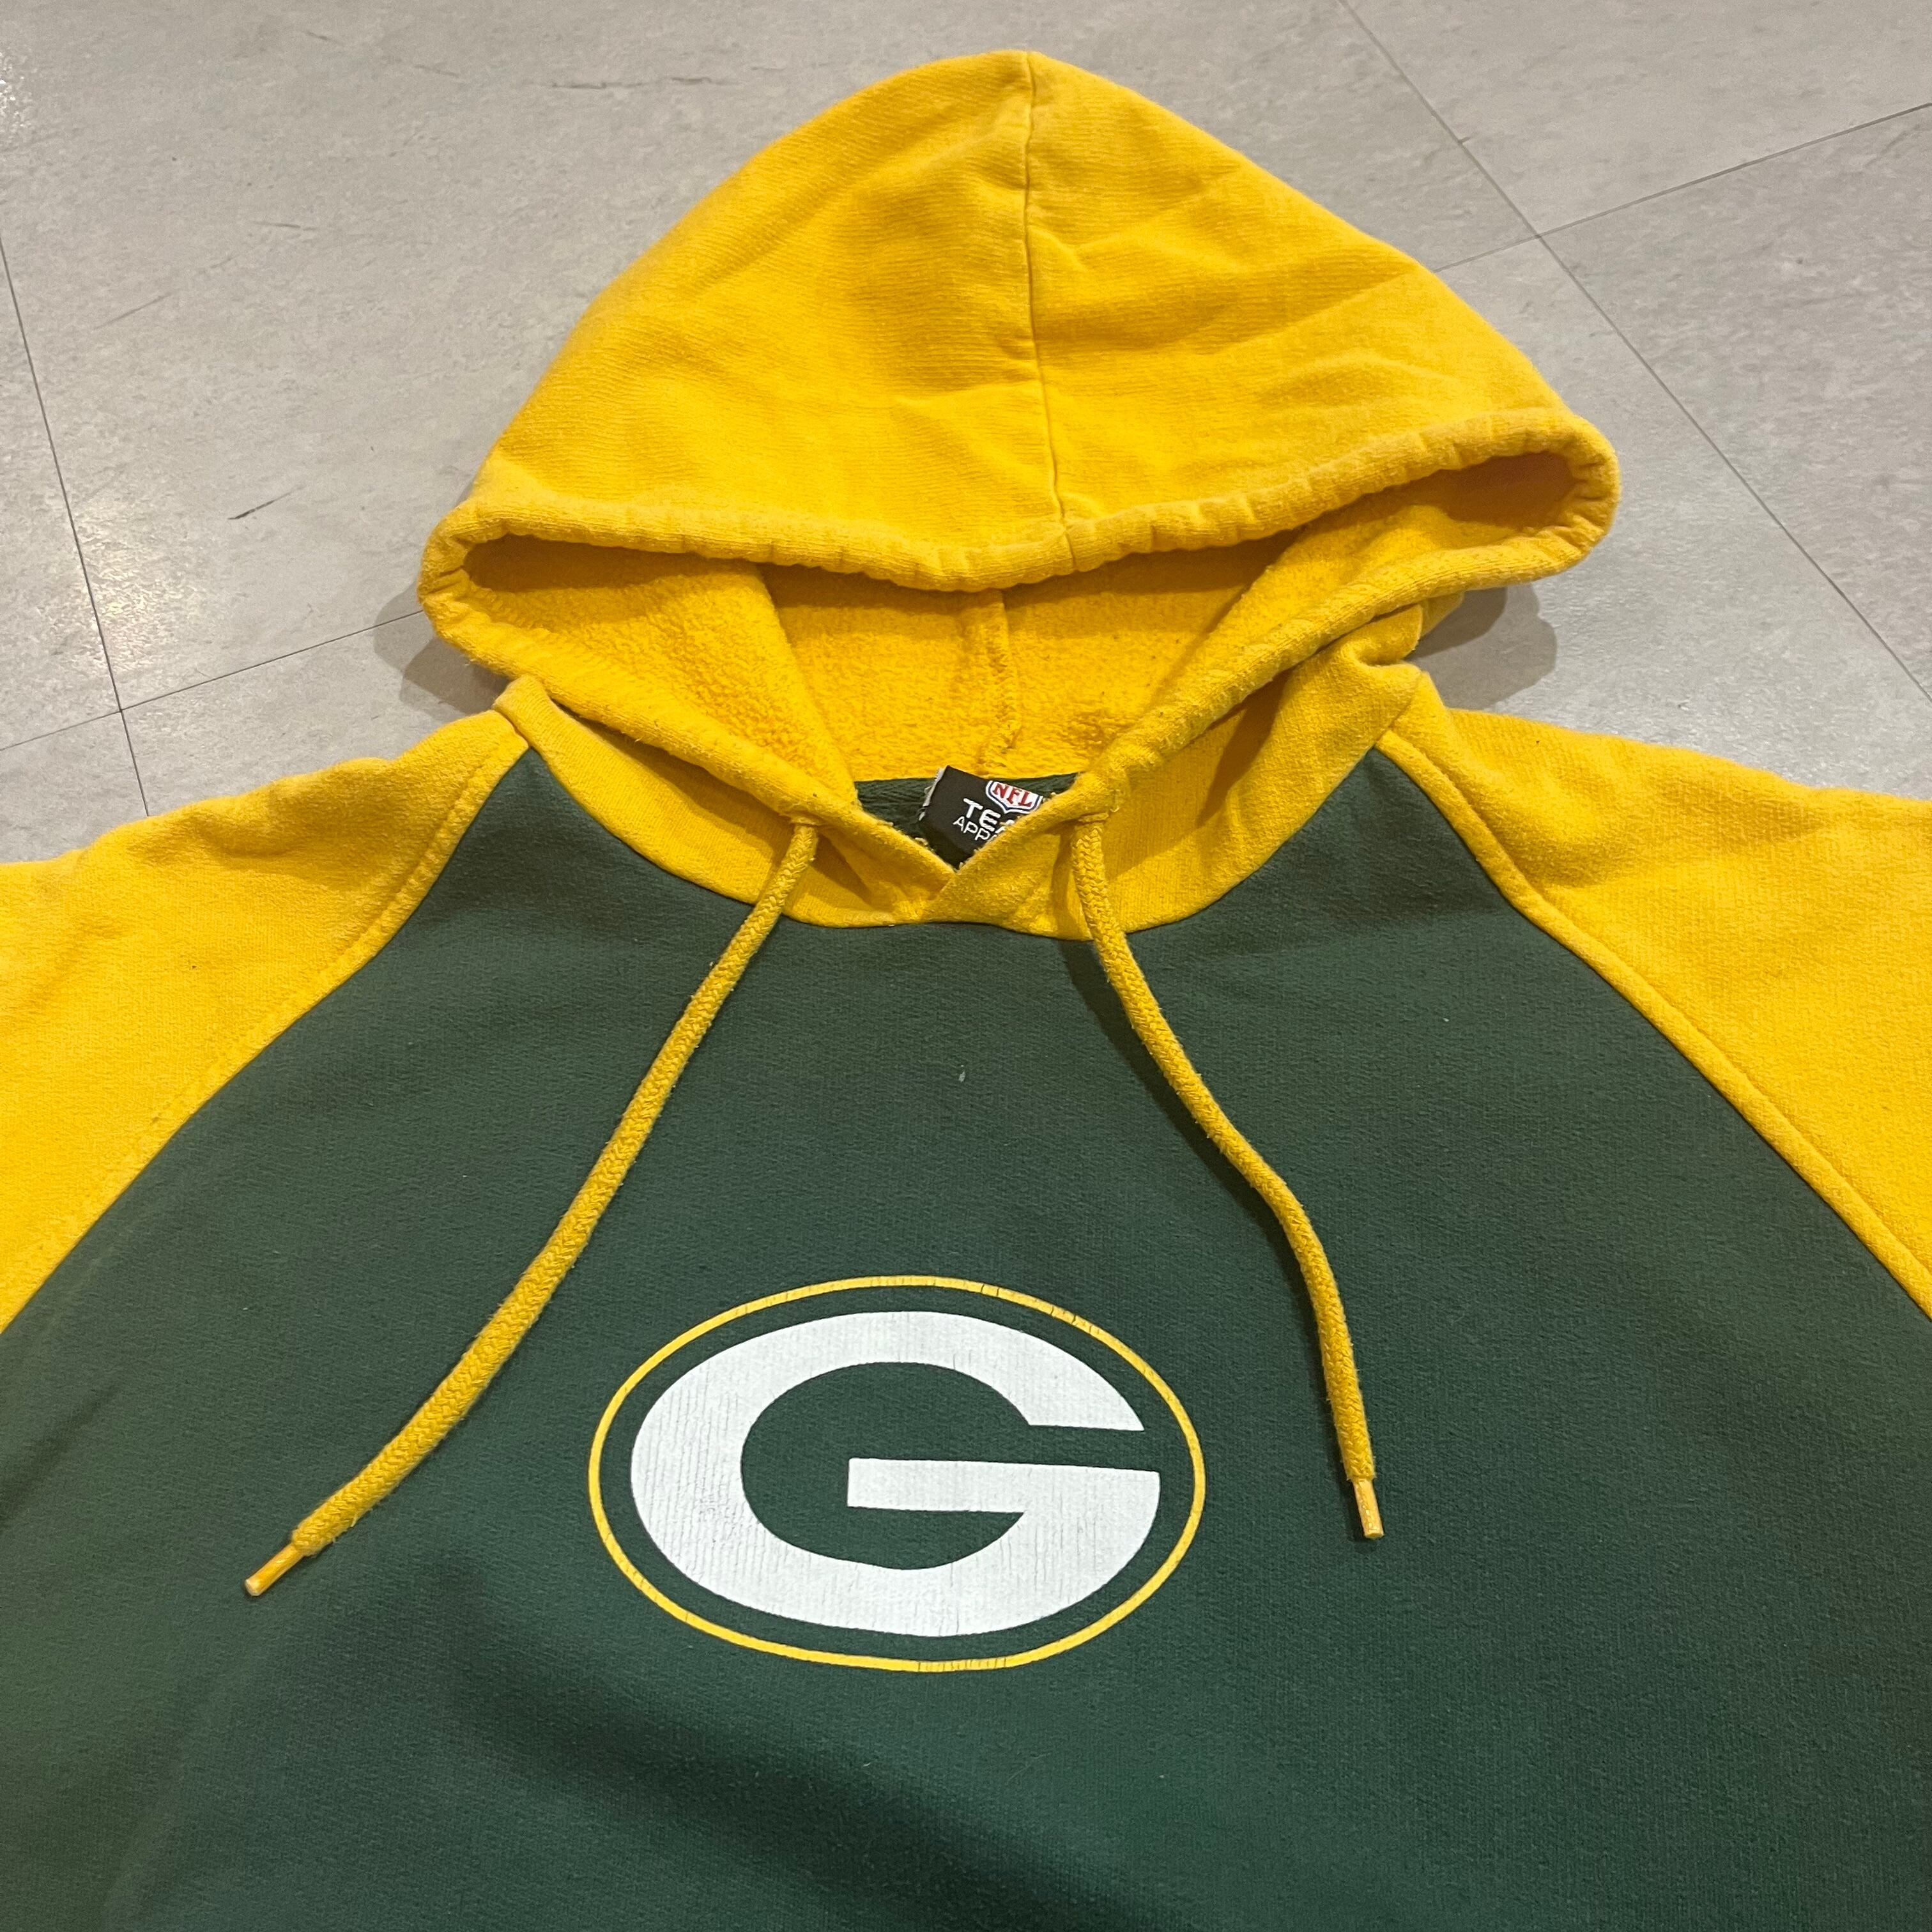 size: L 【 NFL 】PACKERS パッカーズ パーカー 緑 黄色 ロゴパーカー チーム系 アメフト 古着 古着屋 高円寺 ヴィンテージ